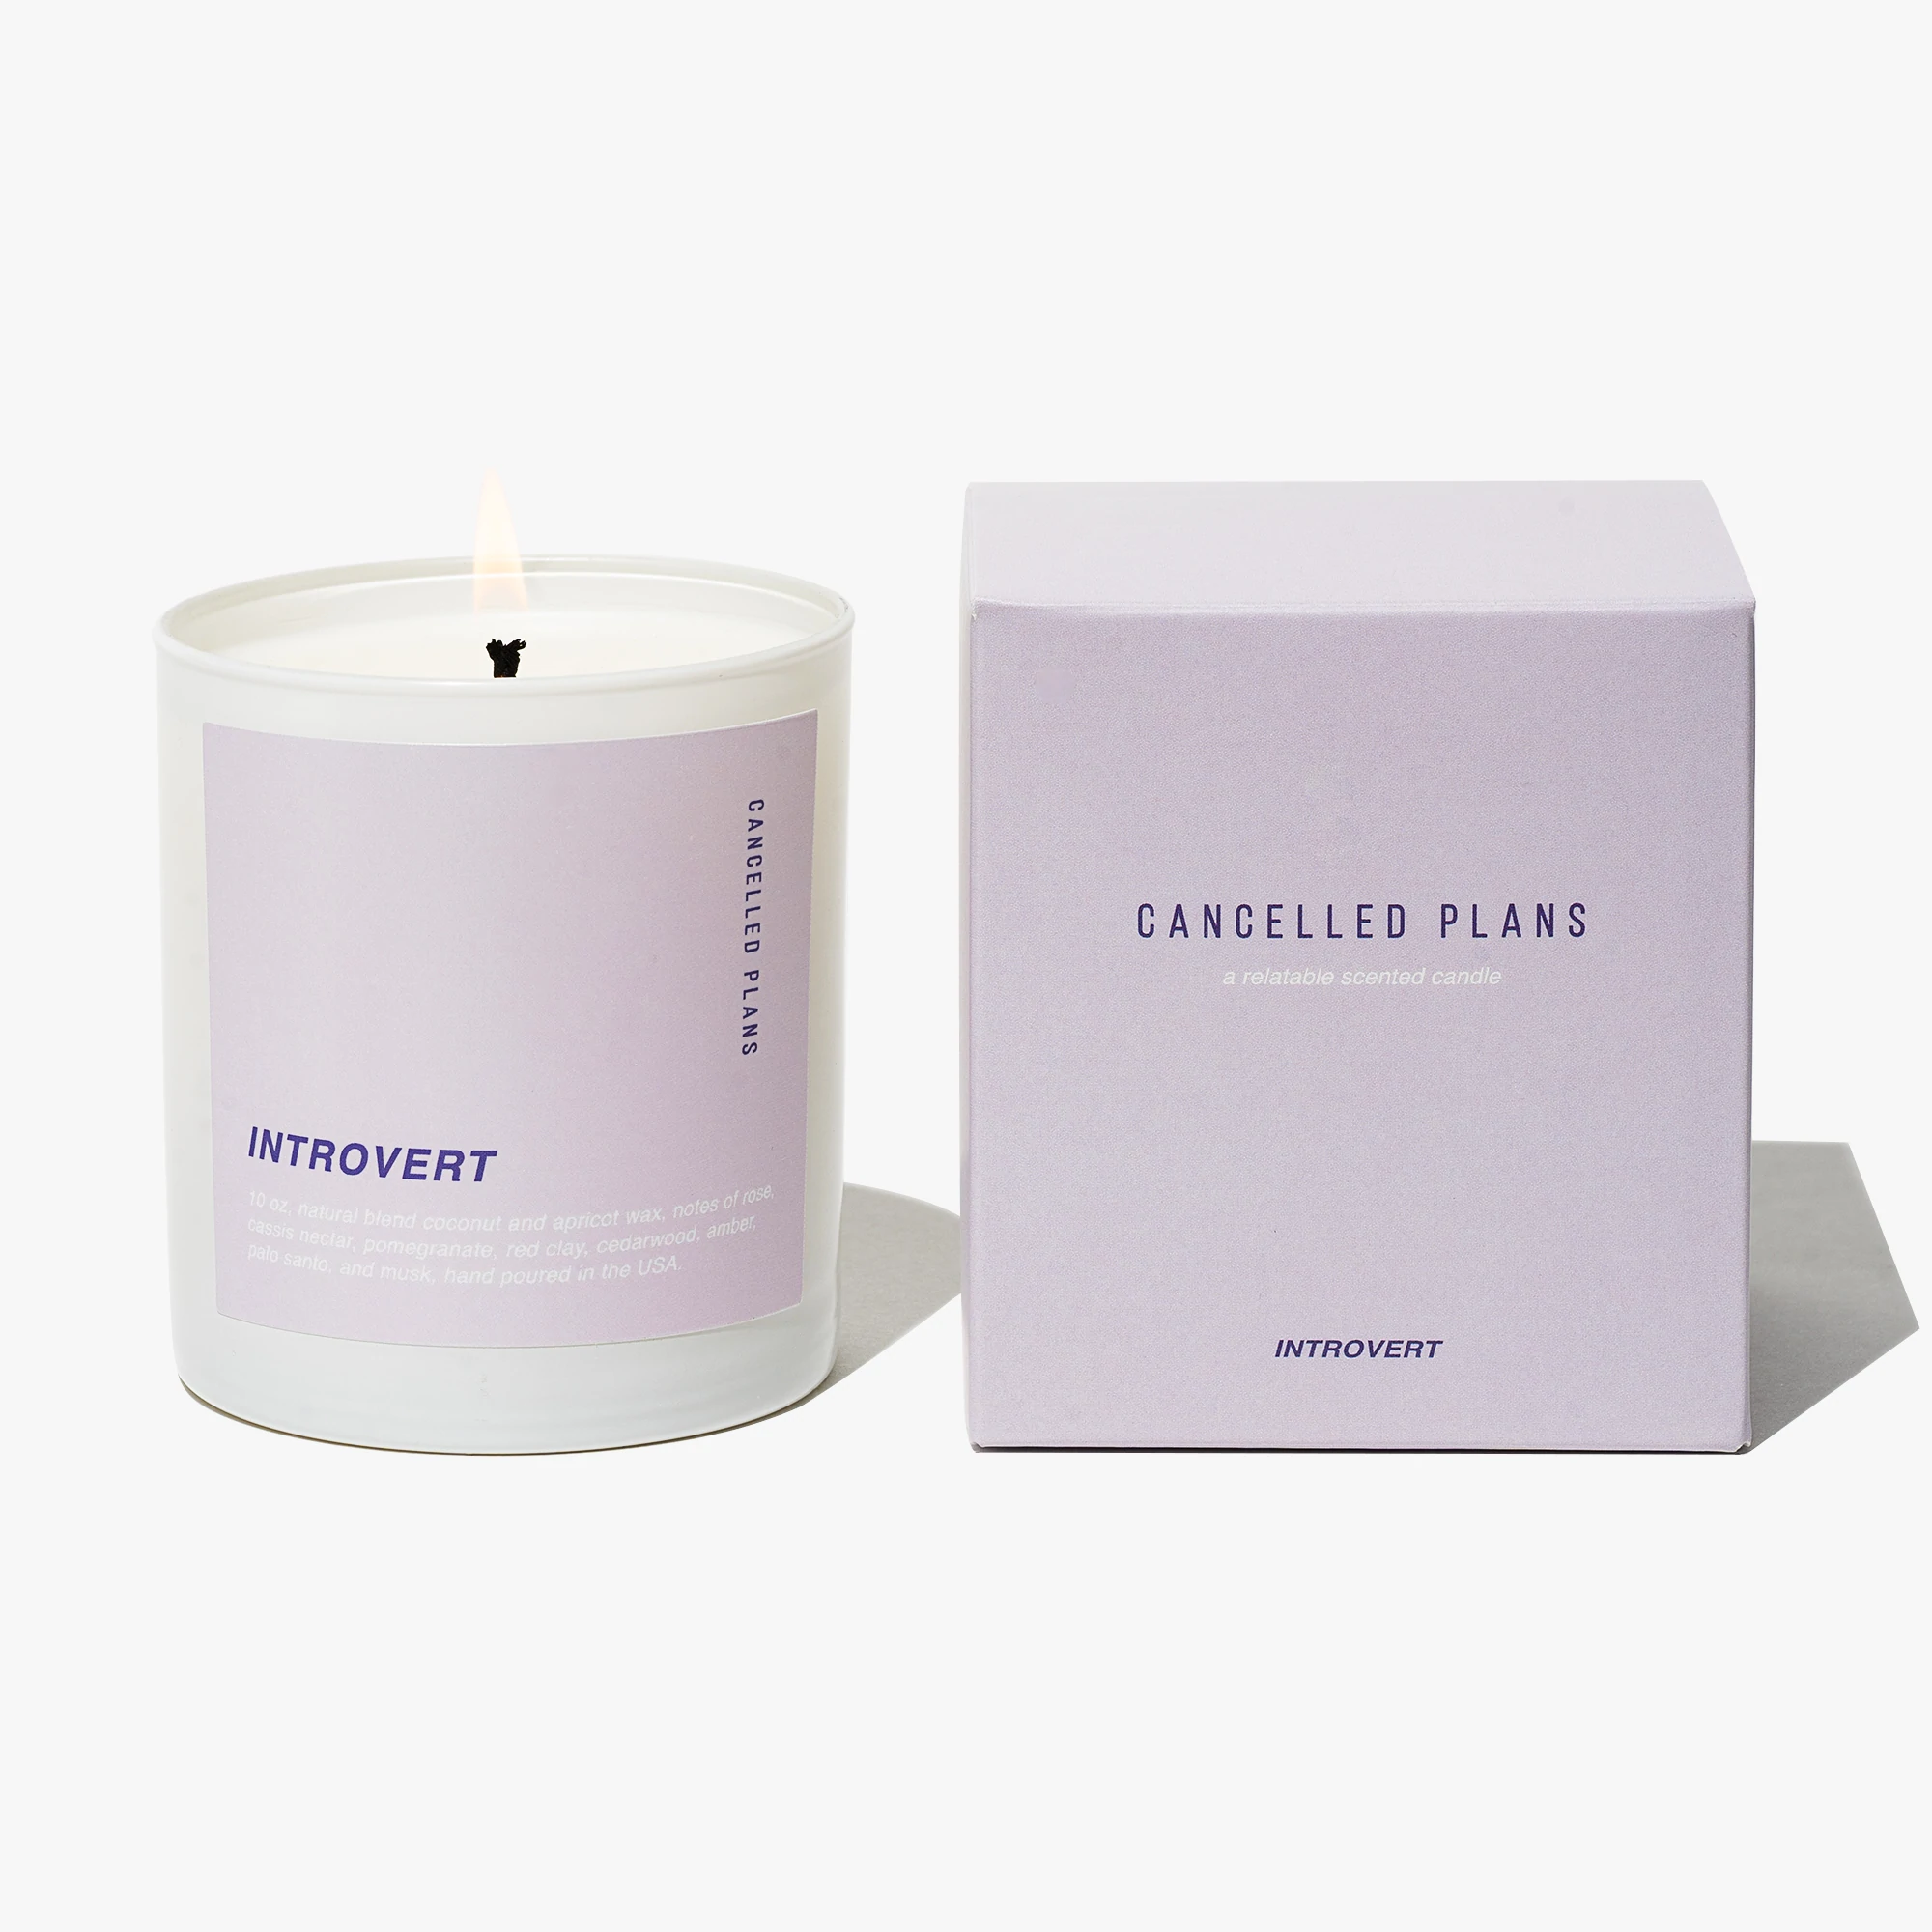 Cancelled Plans Introvert Candle